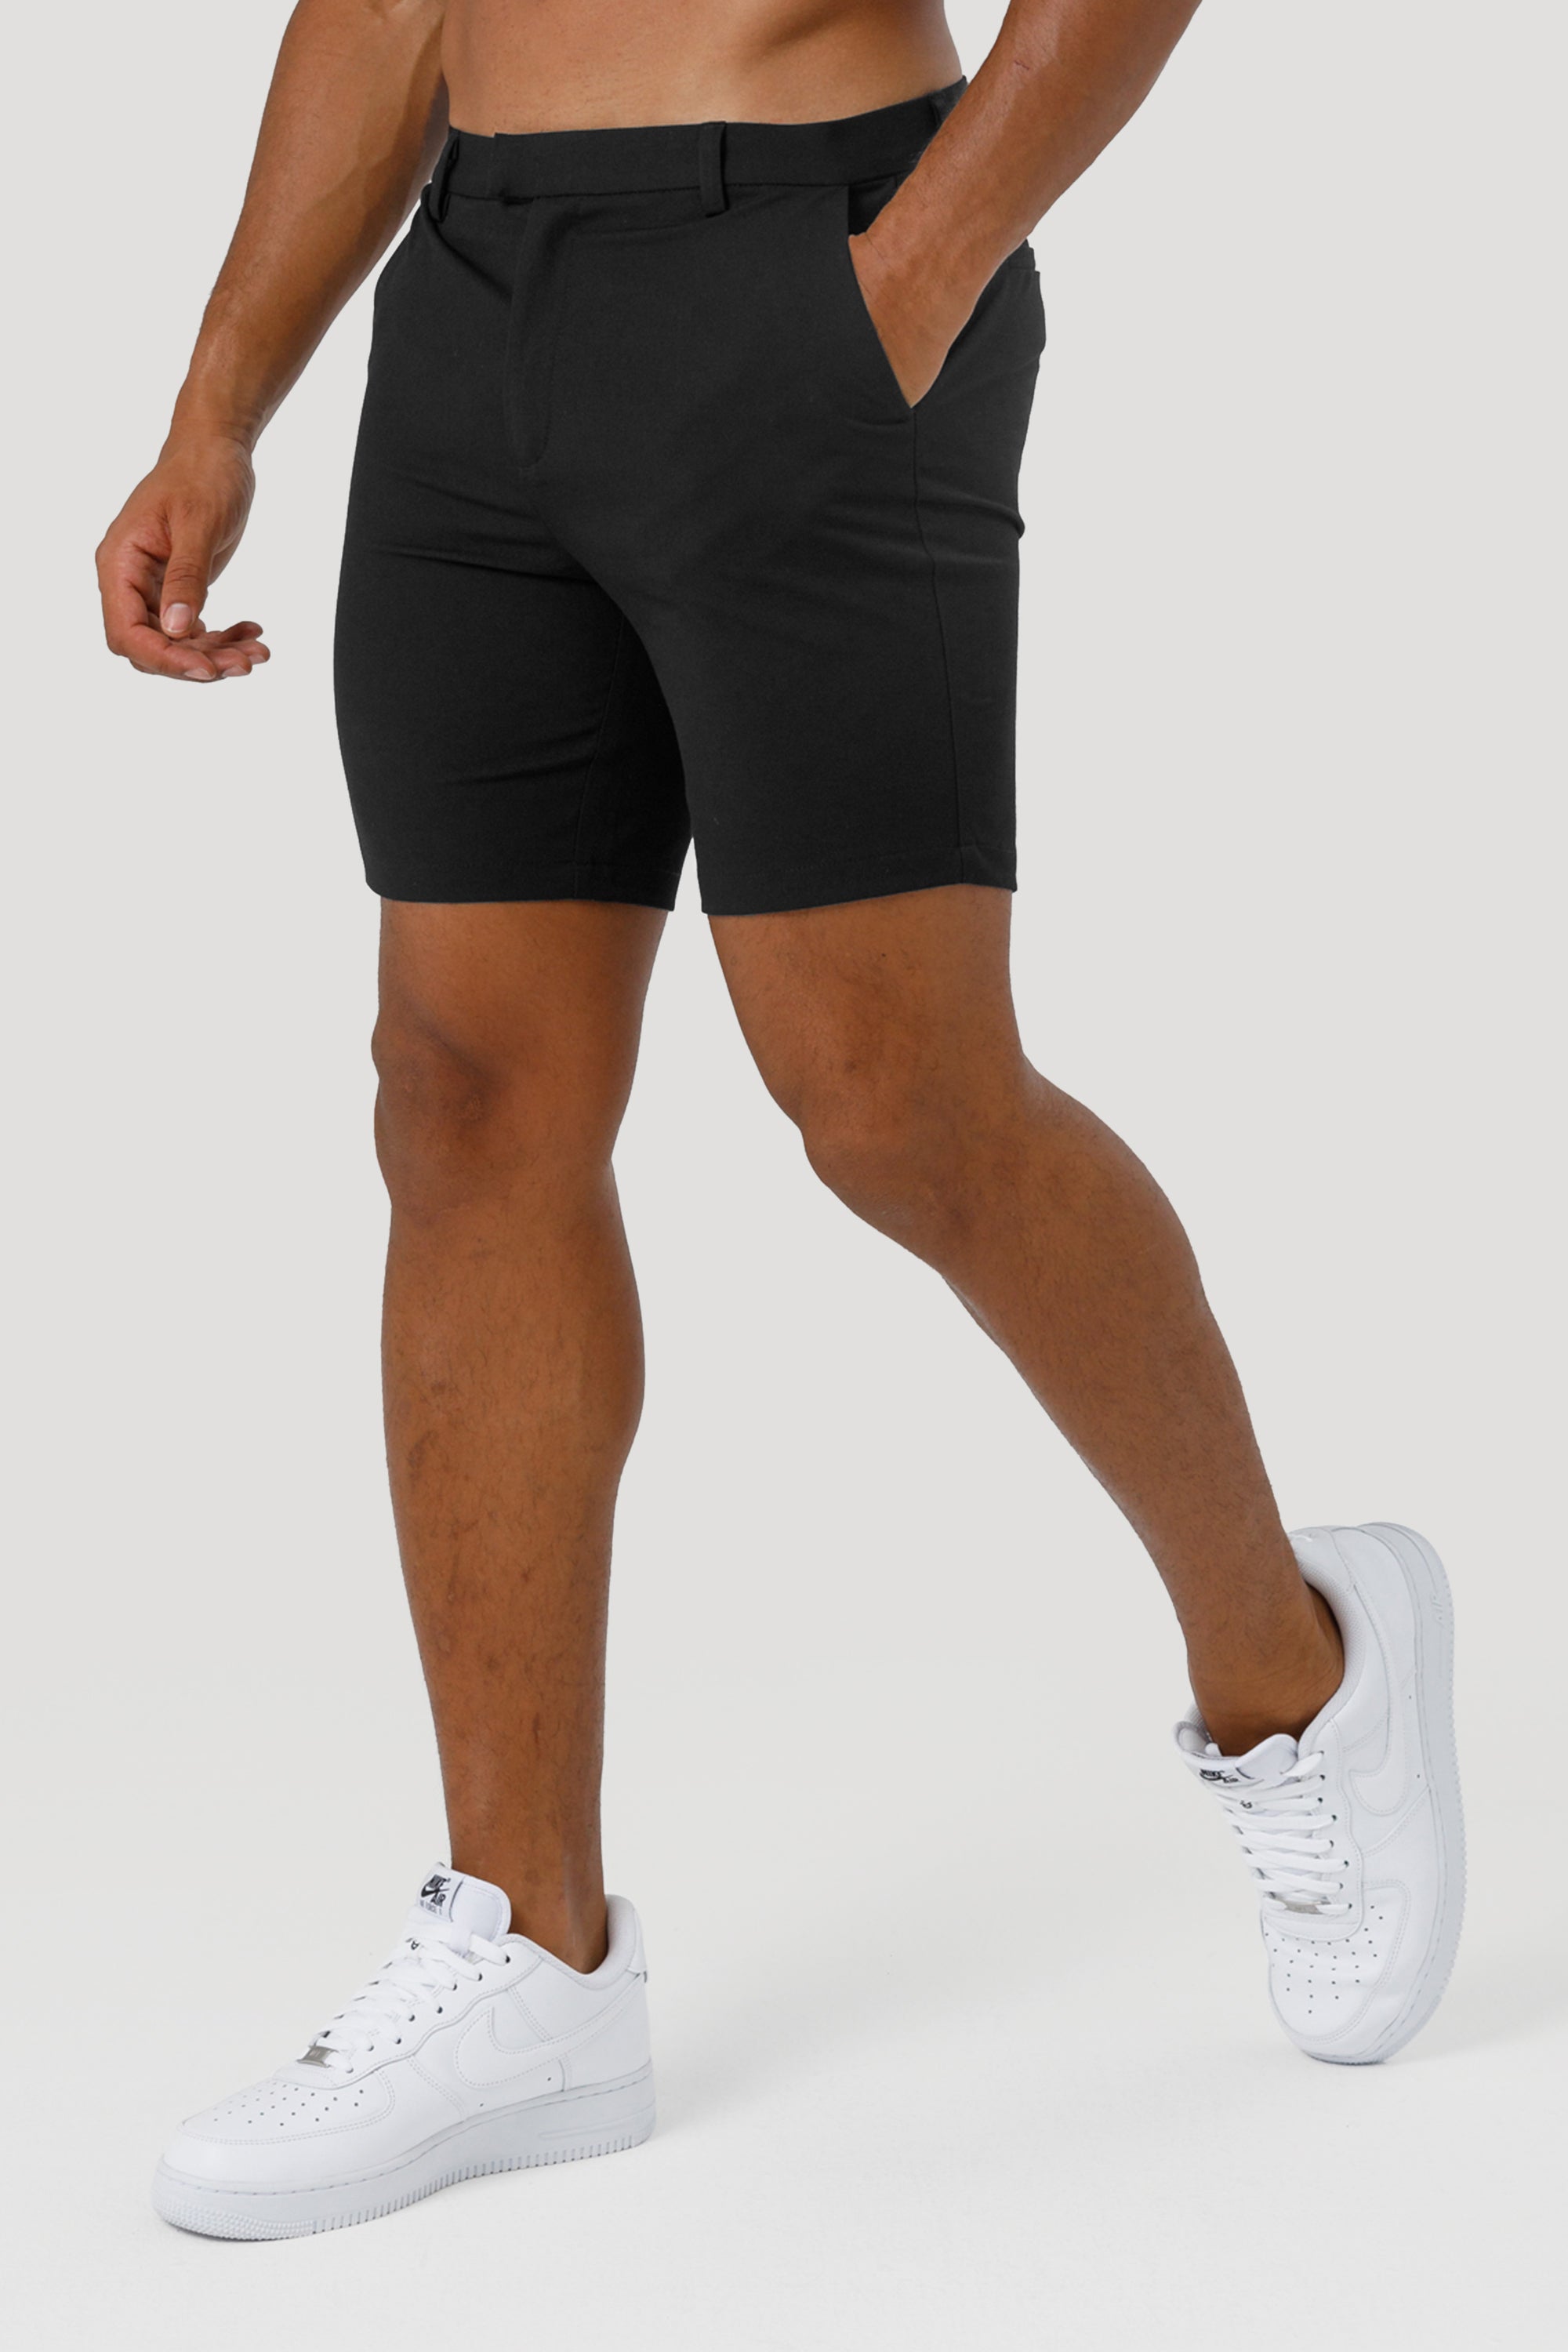 THE LUCIA SHORTS - BLACK